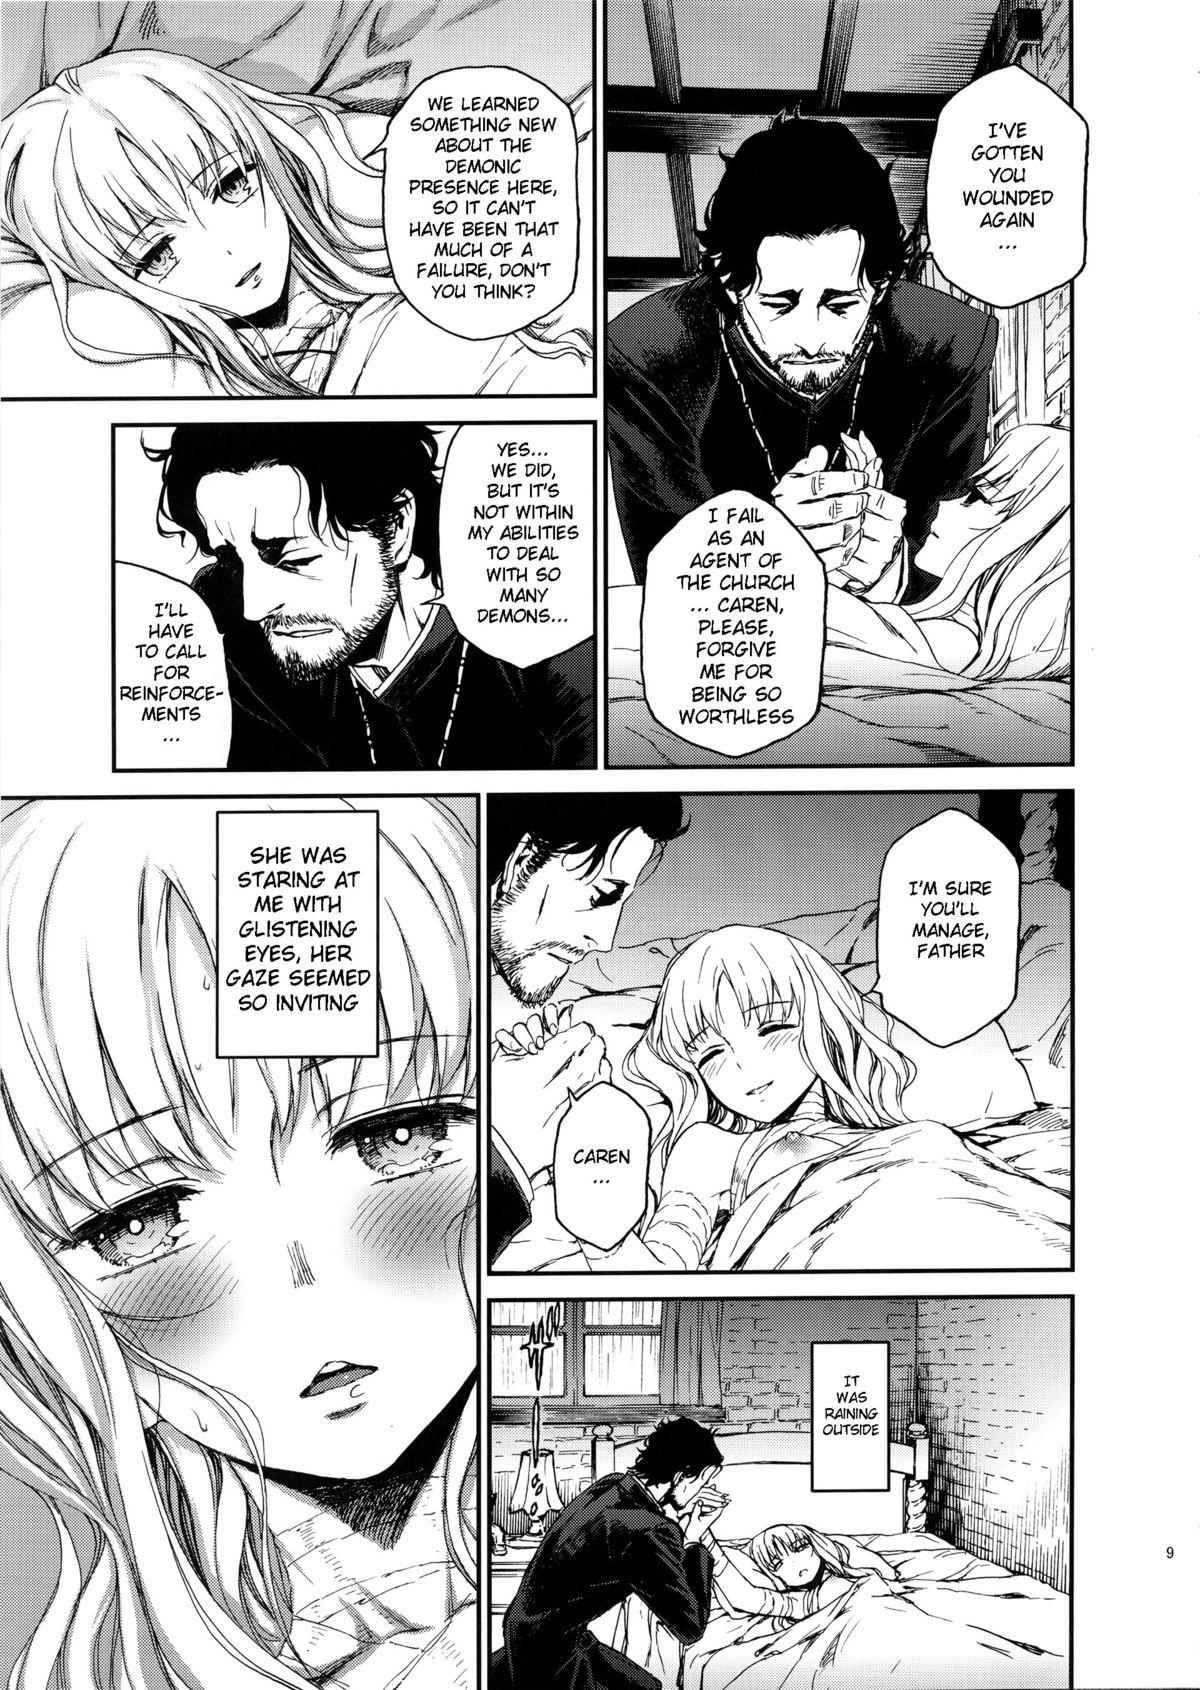 Best Blowjob Ever Eros&Agape - Fate hollow ataraxia Blow Jobs - Page 8